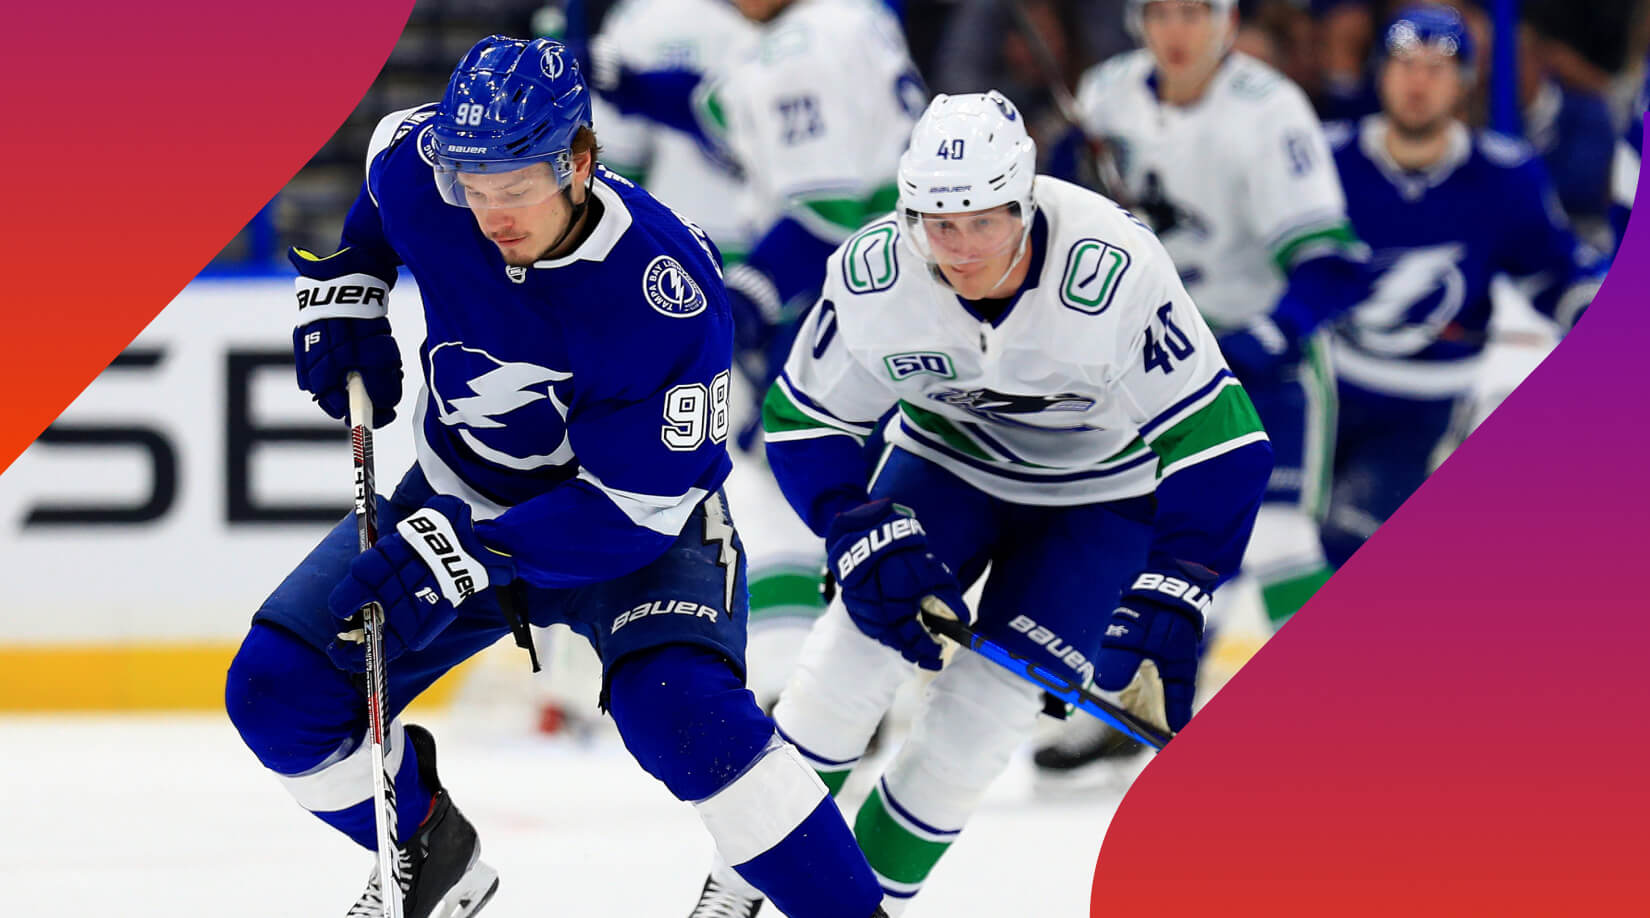 Top trends at the start of the NHL season: The Vancouver Canucks Are Being Underlooked